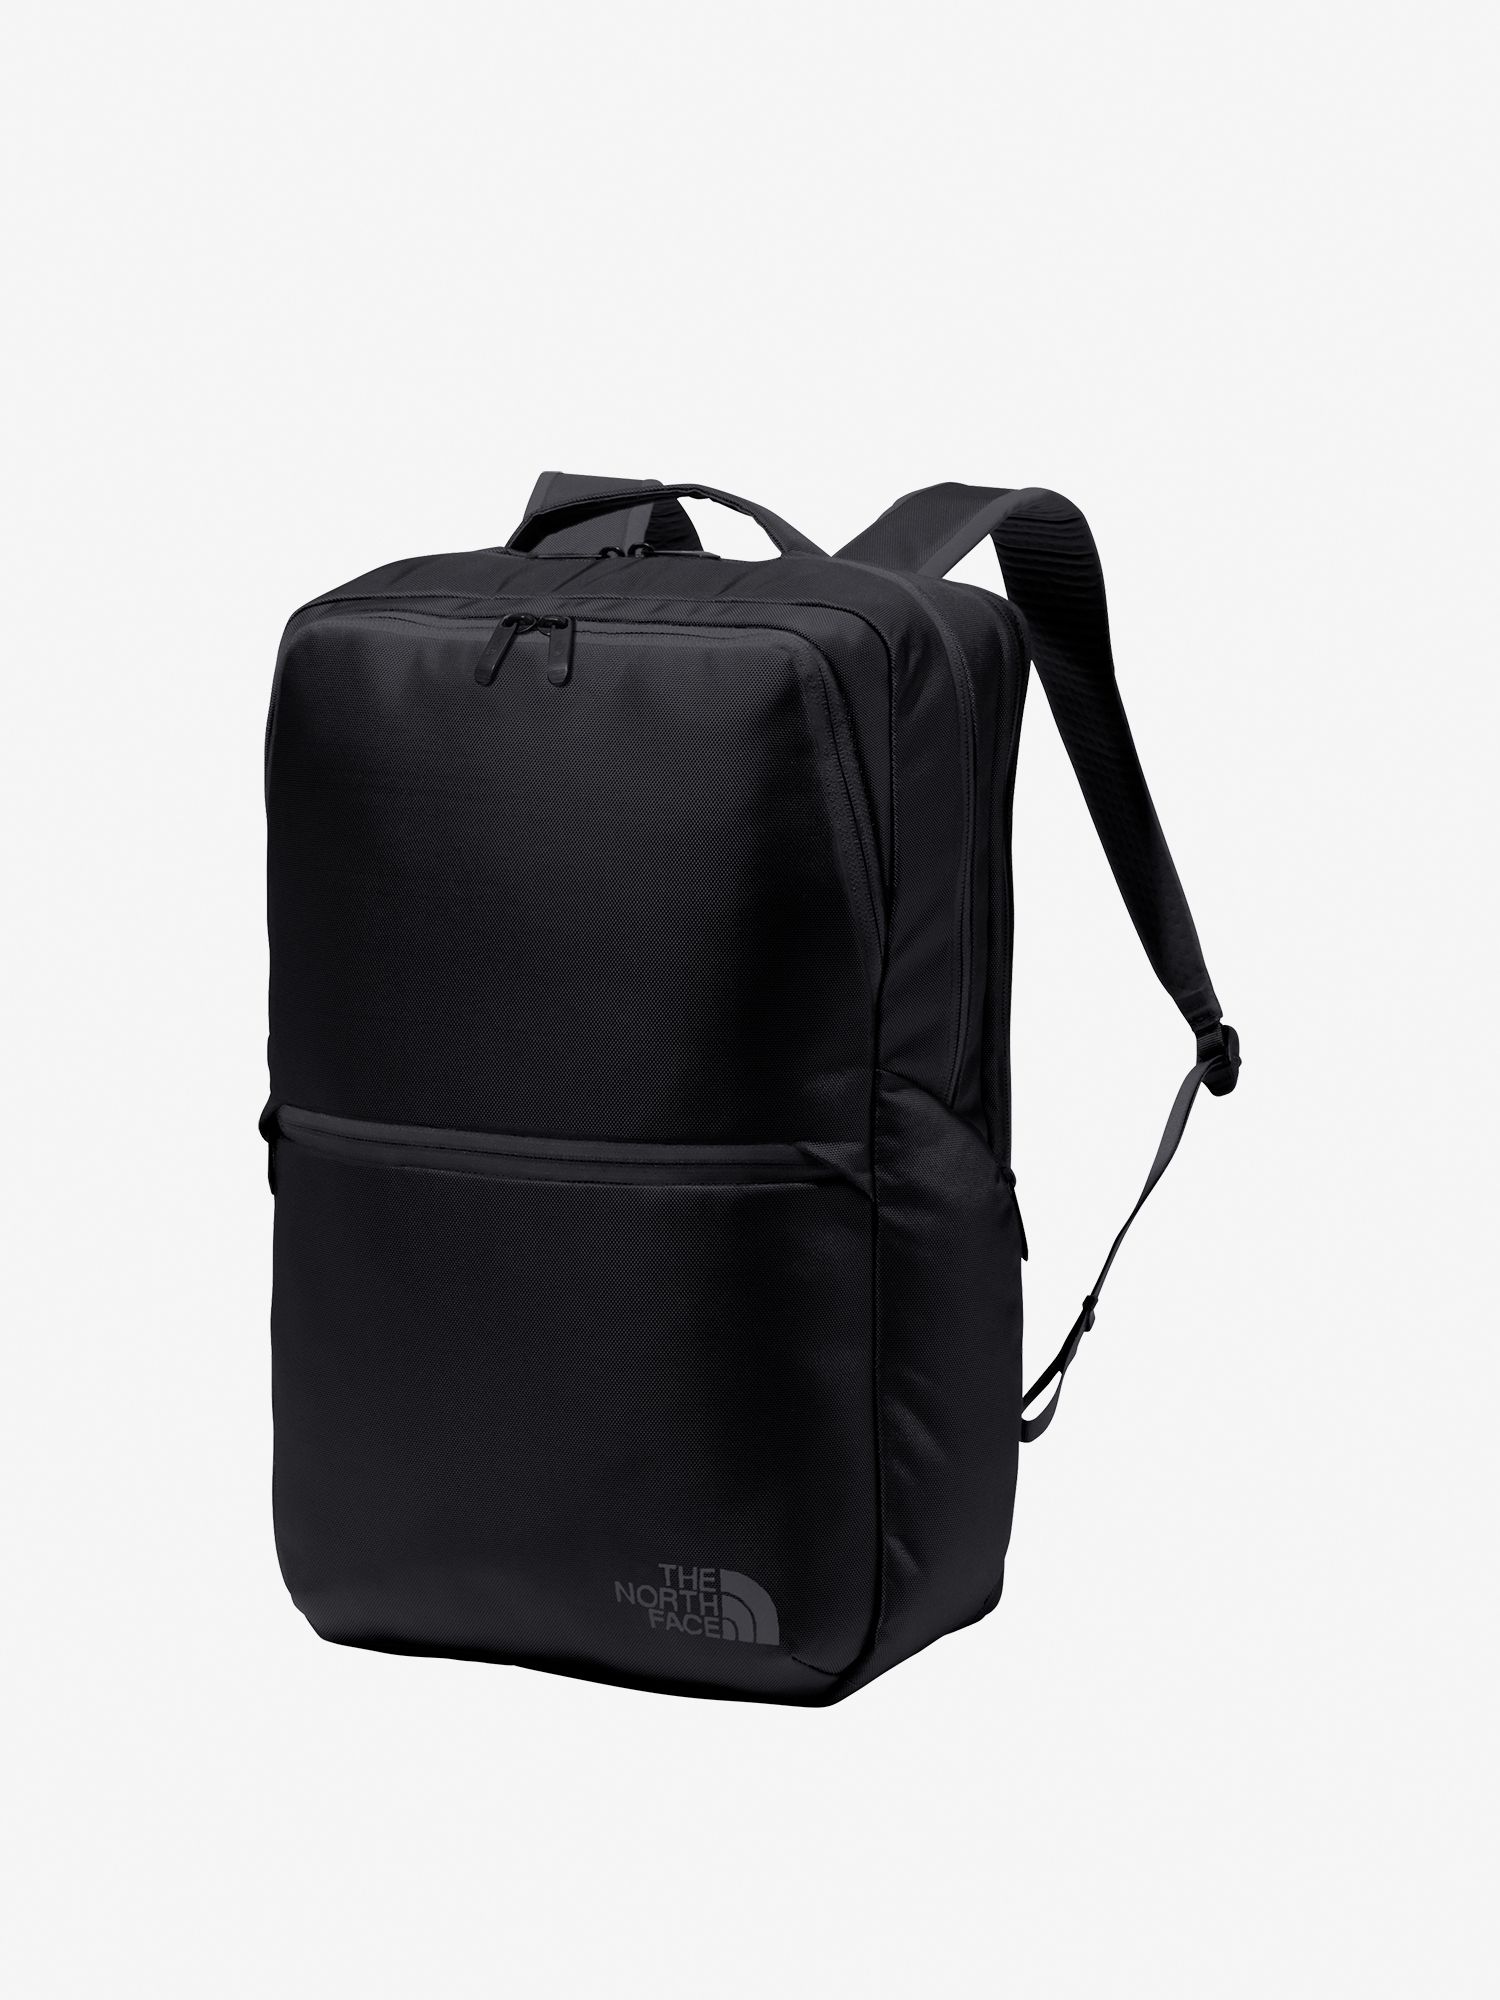 THE NORTH FACE/ Shuttle Daypack 25L